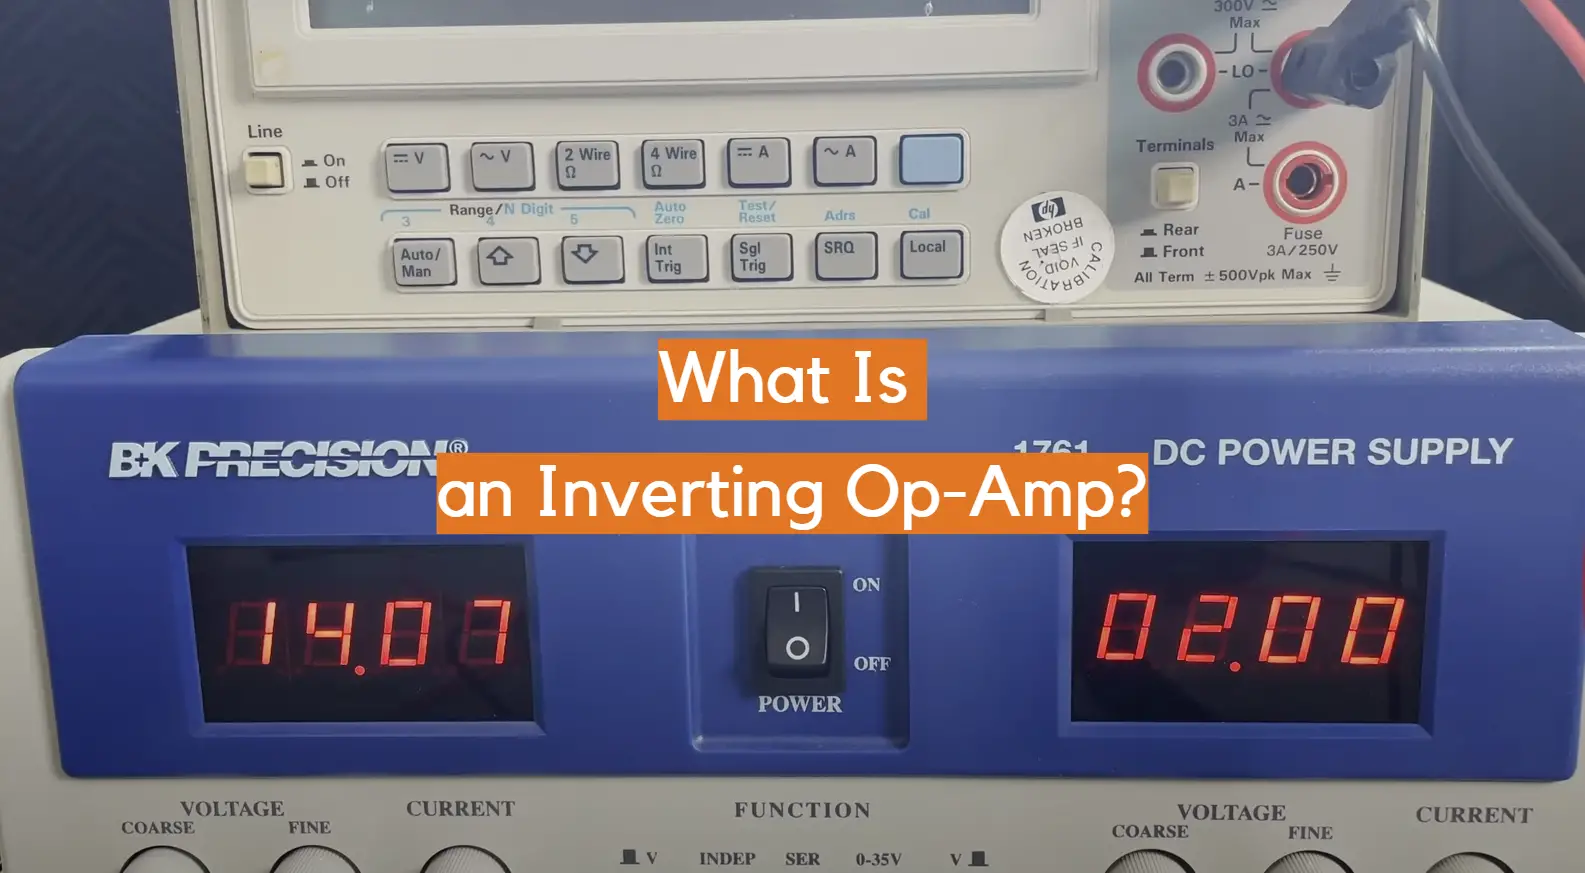 What Is an Inverting Op-Amp?